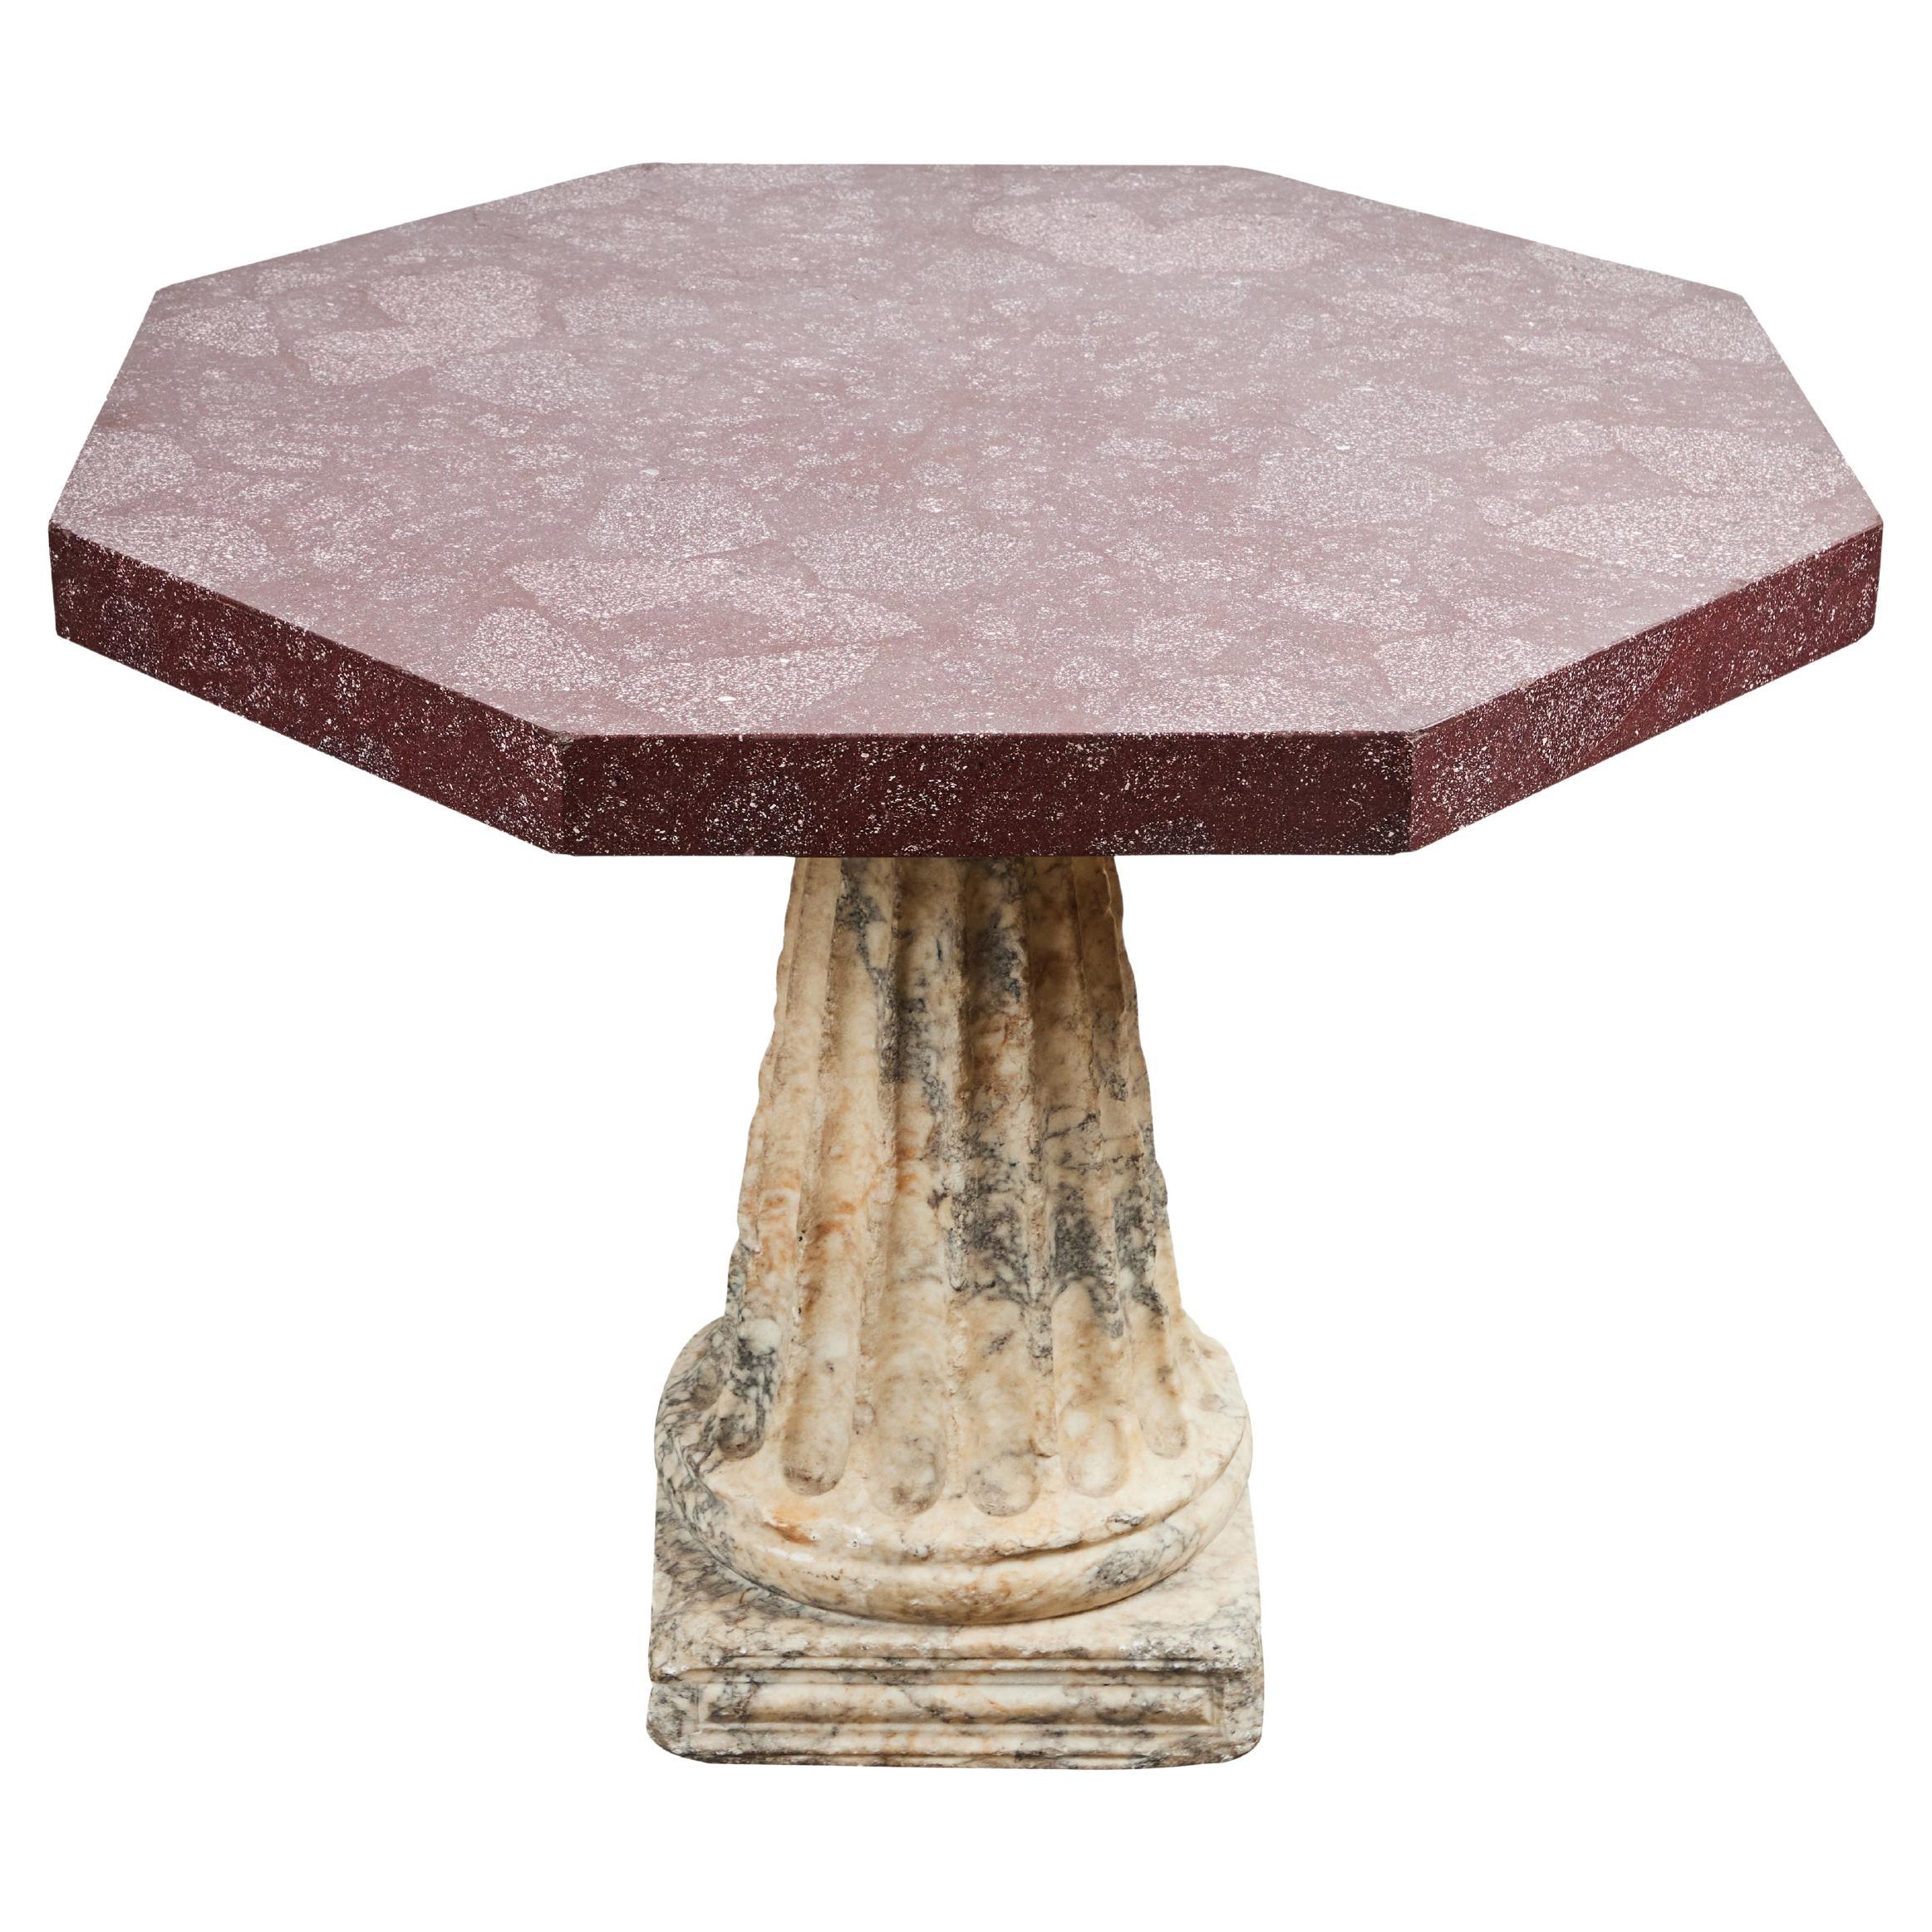 An exceptional table made of a Roman pavonazzo marble base, originally from a labrum, circa 1st/2nd century, with a later porphyry veneered top.